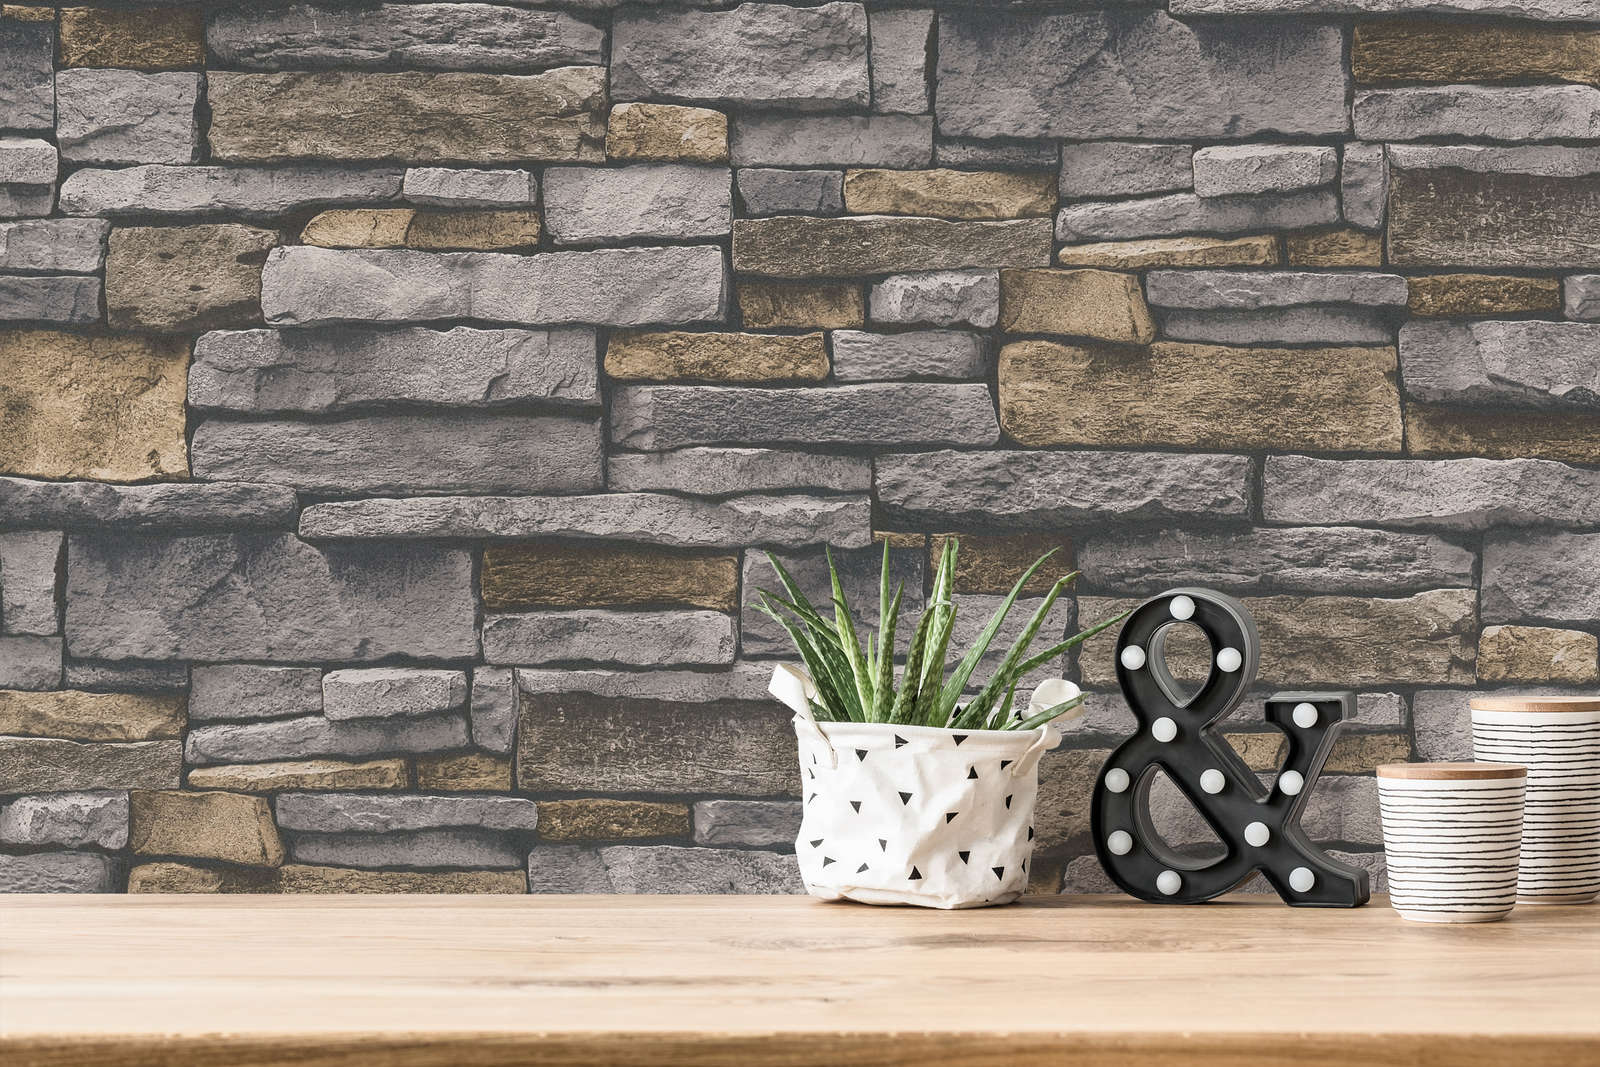             Non-woven wallpaper in stone look with natural stone wall - grey, beige
        